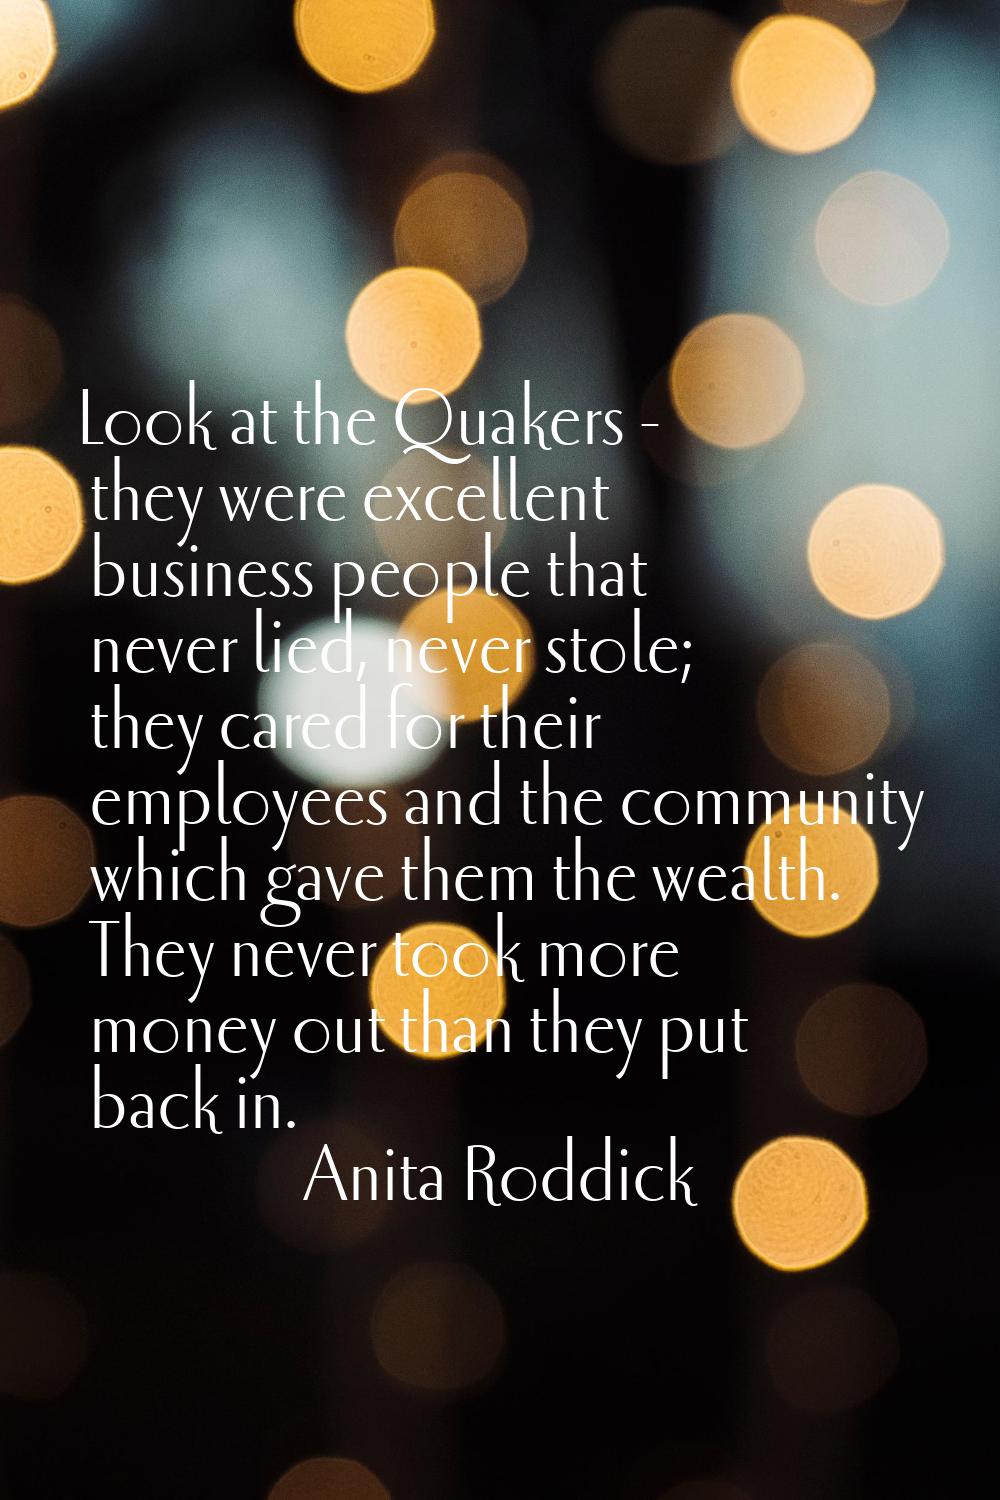 Look at the Quakers - they were excellent business people that never lied, never stole; they cared 